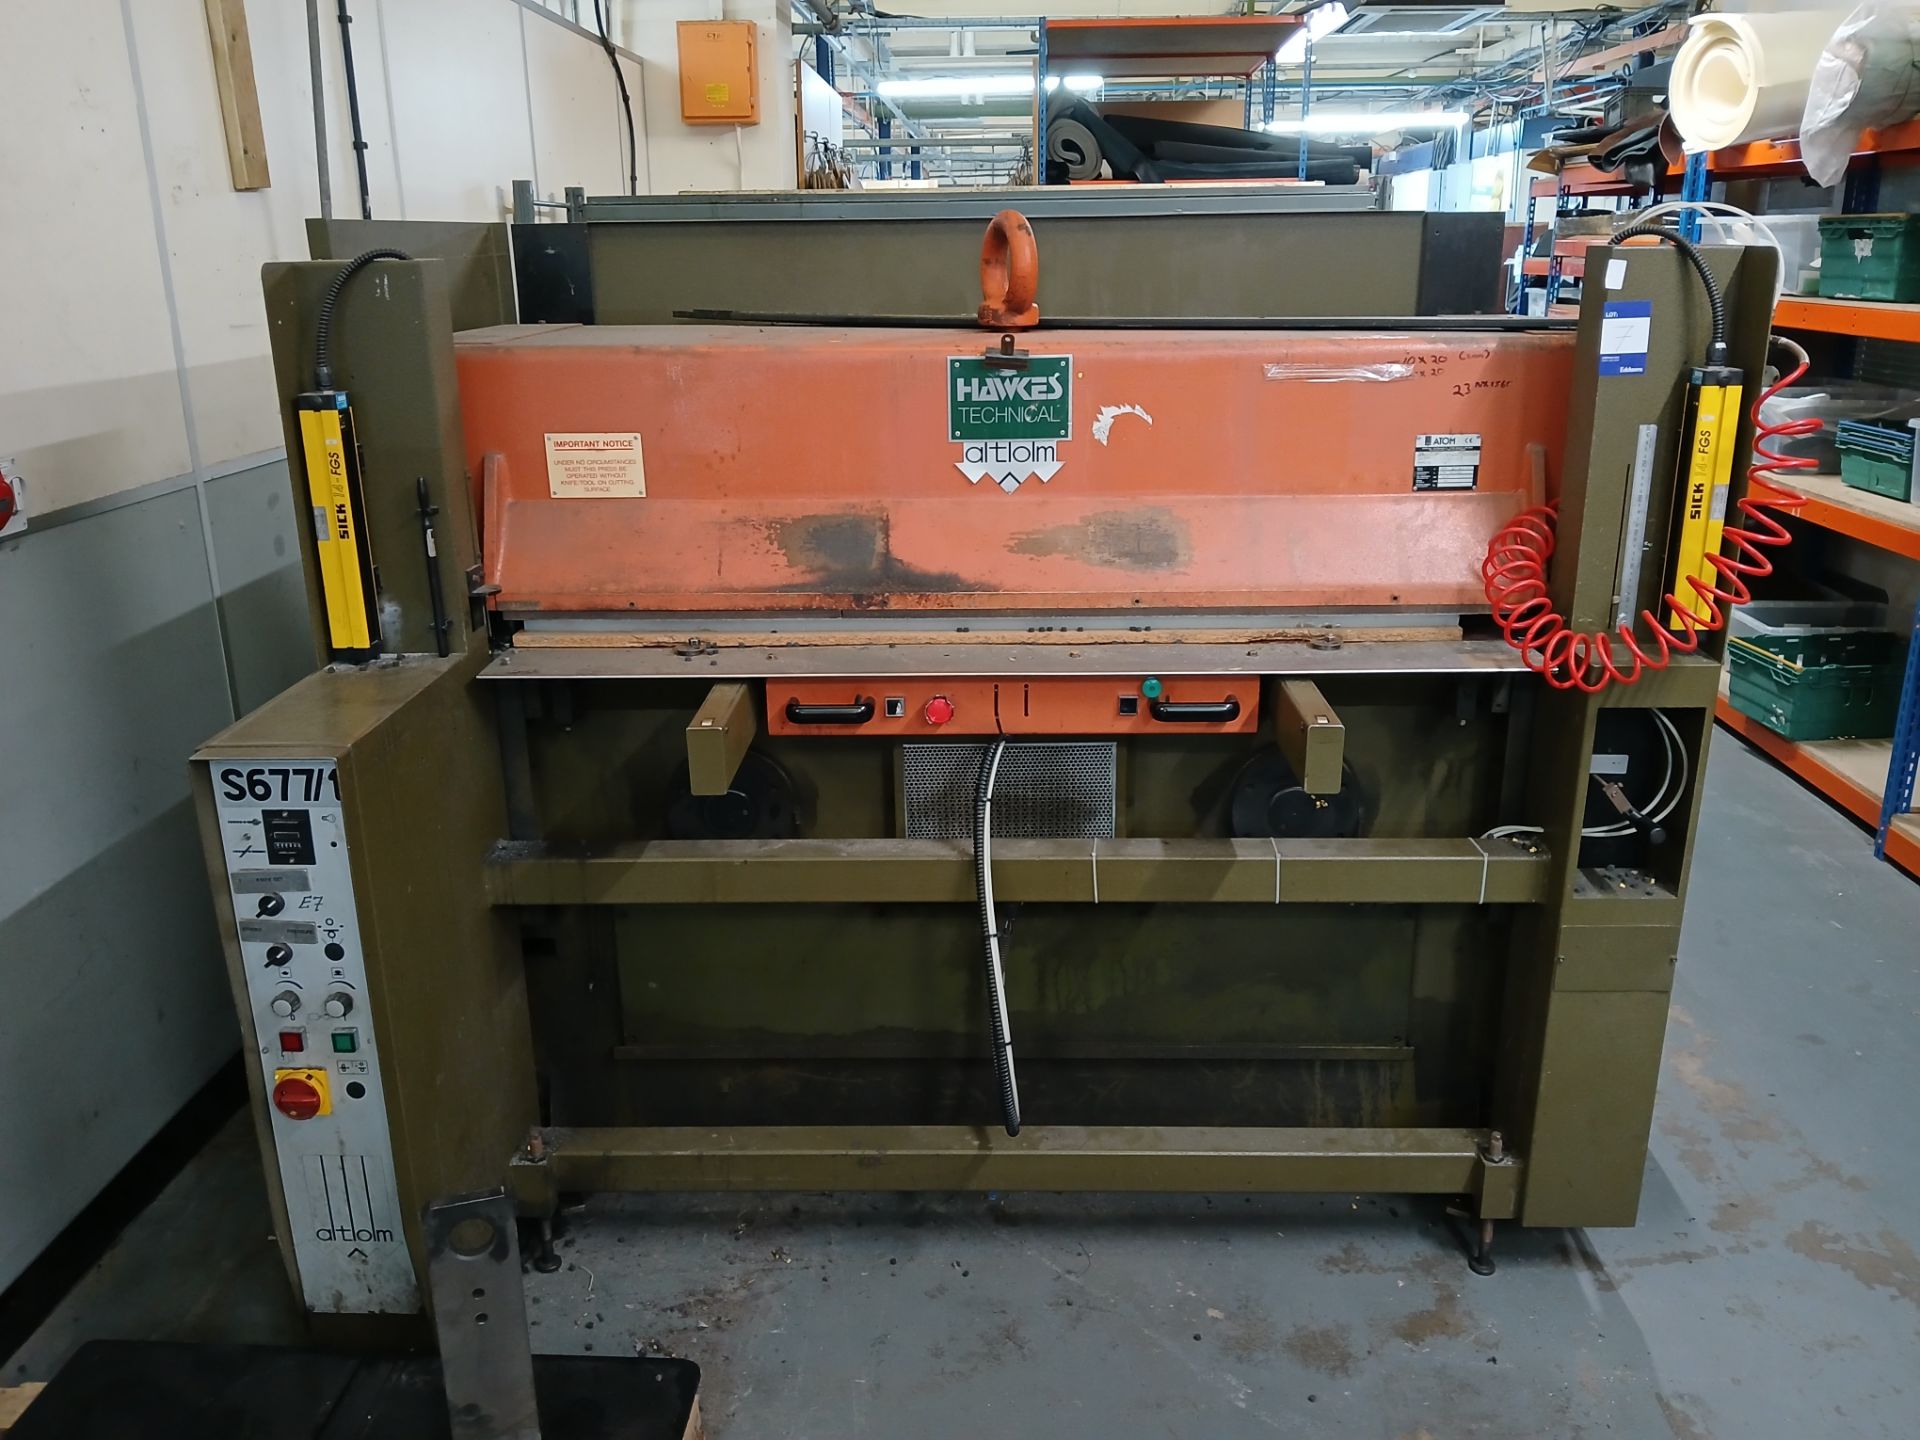 Atom 5677/1 Press Serial number ZC580018 (1997) 1650mm capacity with side lightguards, overall - Bild 2 aus 8